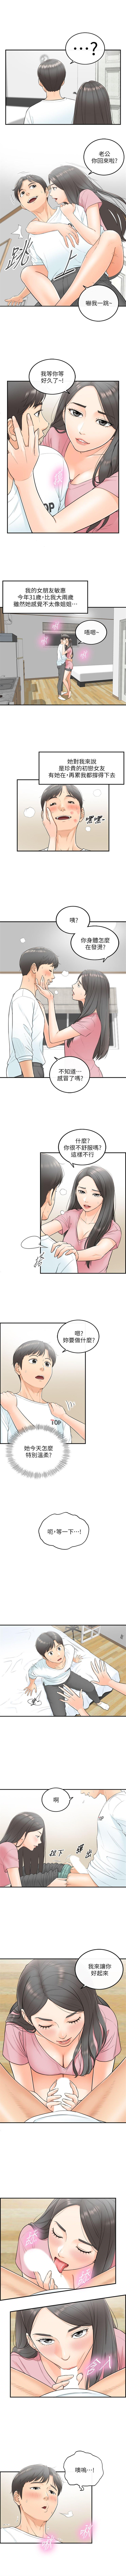 Pure18 正妹小主管 1-52 官方中文（連載中） Gay Ass Fucking - Page 5